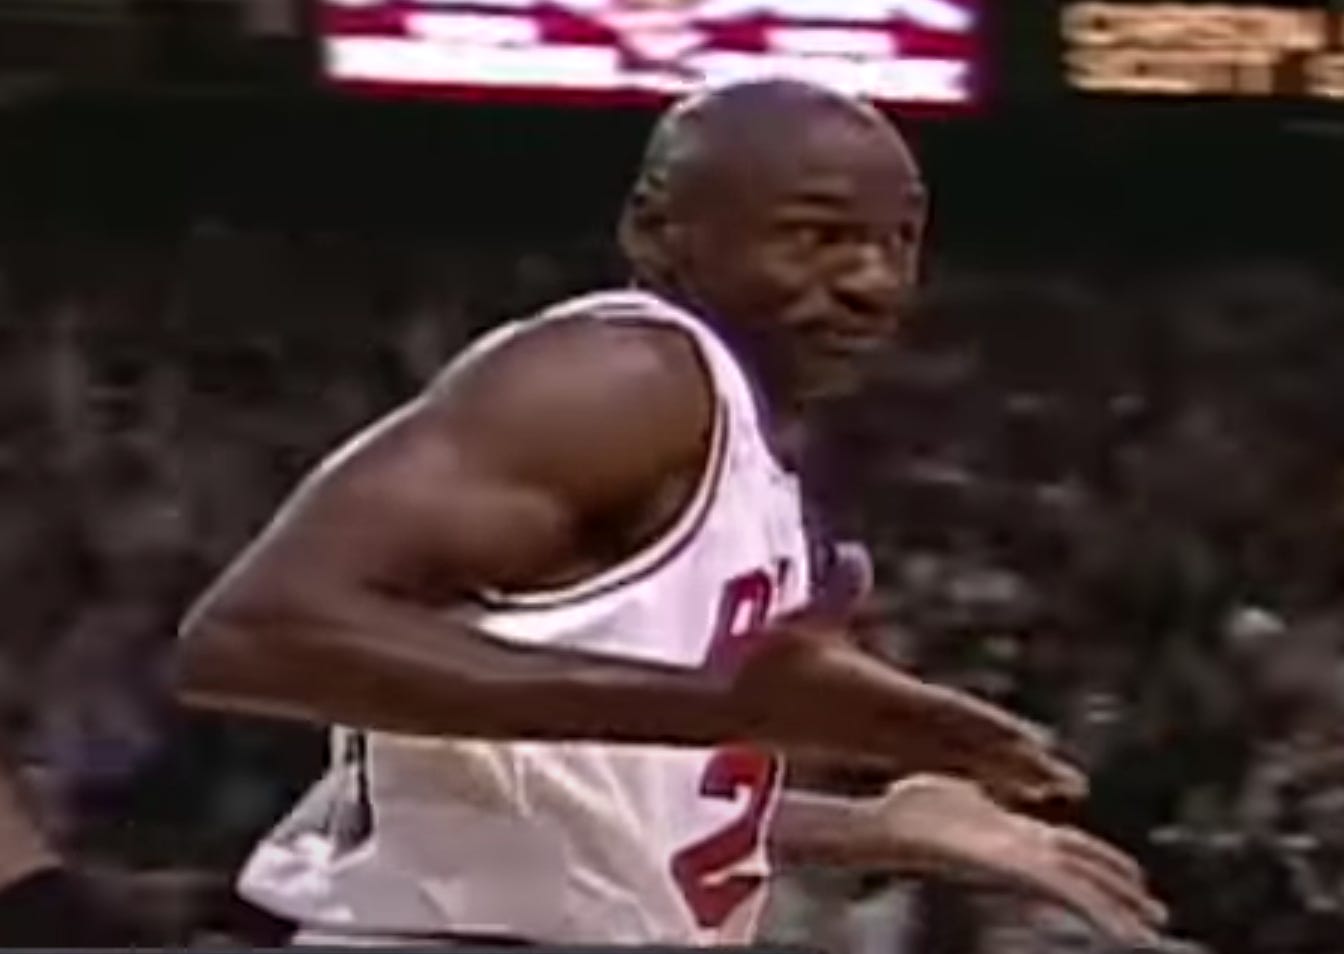 Michael Jordan: Why He's a 6-Time Finals MVP, 6-for-6 Champion and